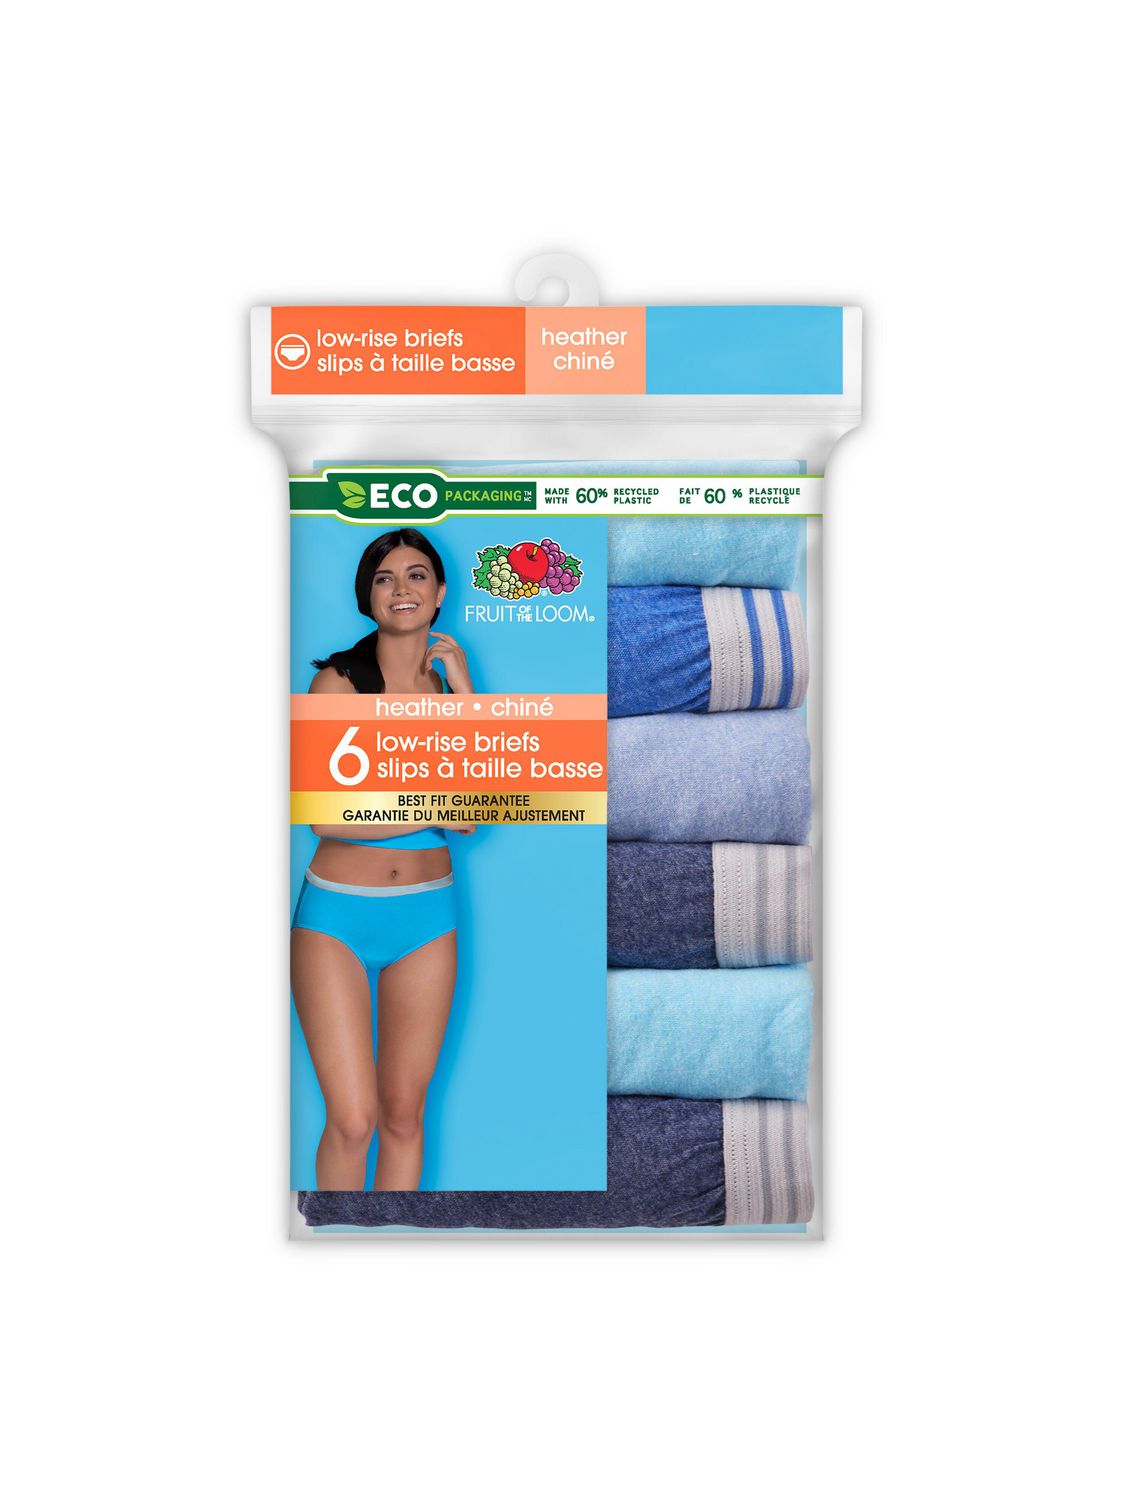 Fruit of the Loom Women's Comfort Covered Hipster Underwear, 6 Pack, Sizes  5-9